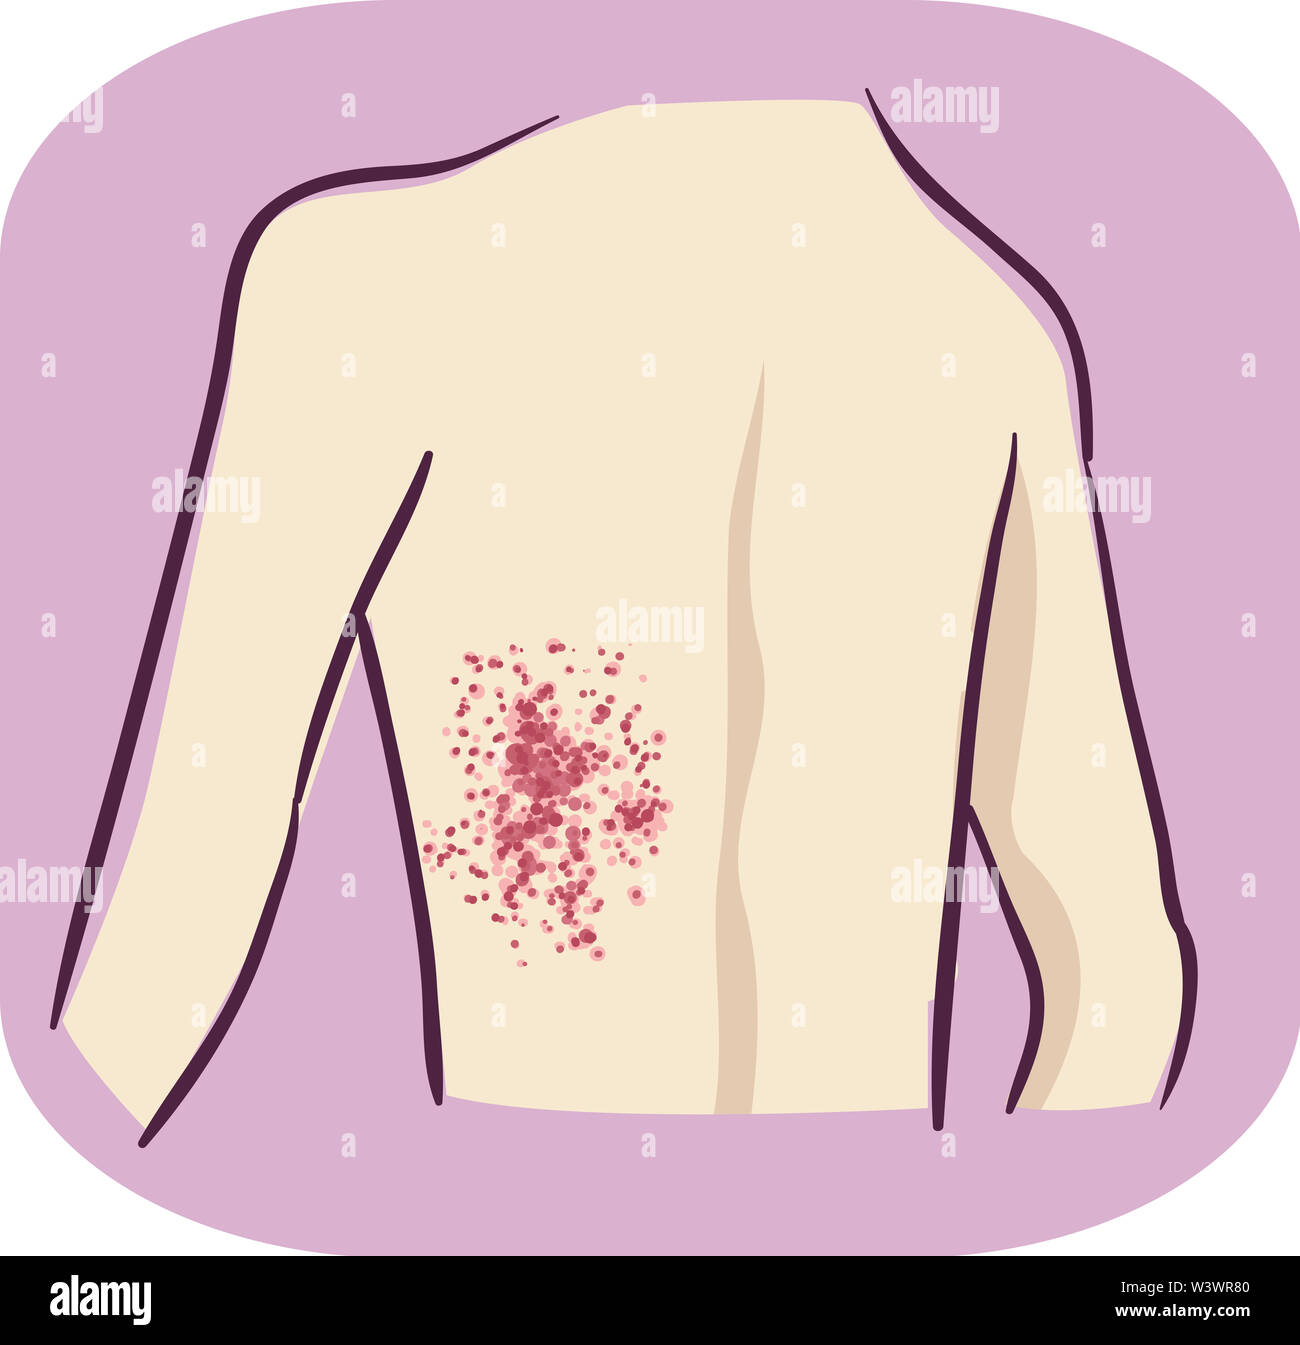 Illustration of Purpura or Purple Discolored Spots on the Back of a Person Stock Photo